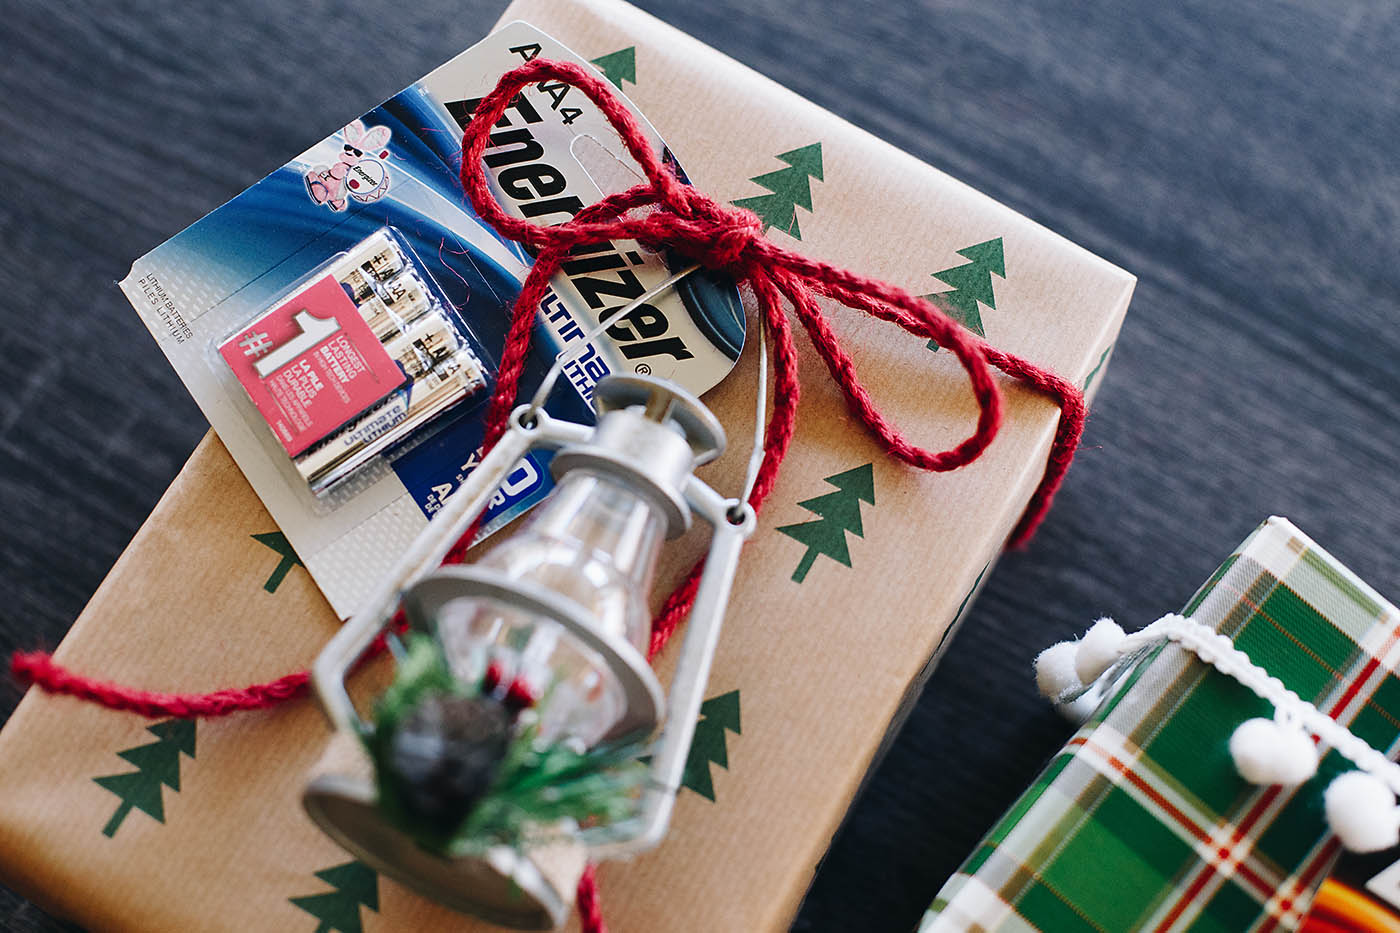 FUN gifts you can still get your teens and how to wrap them